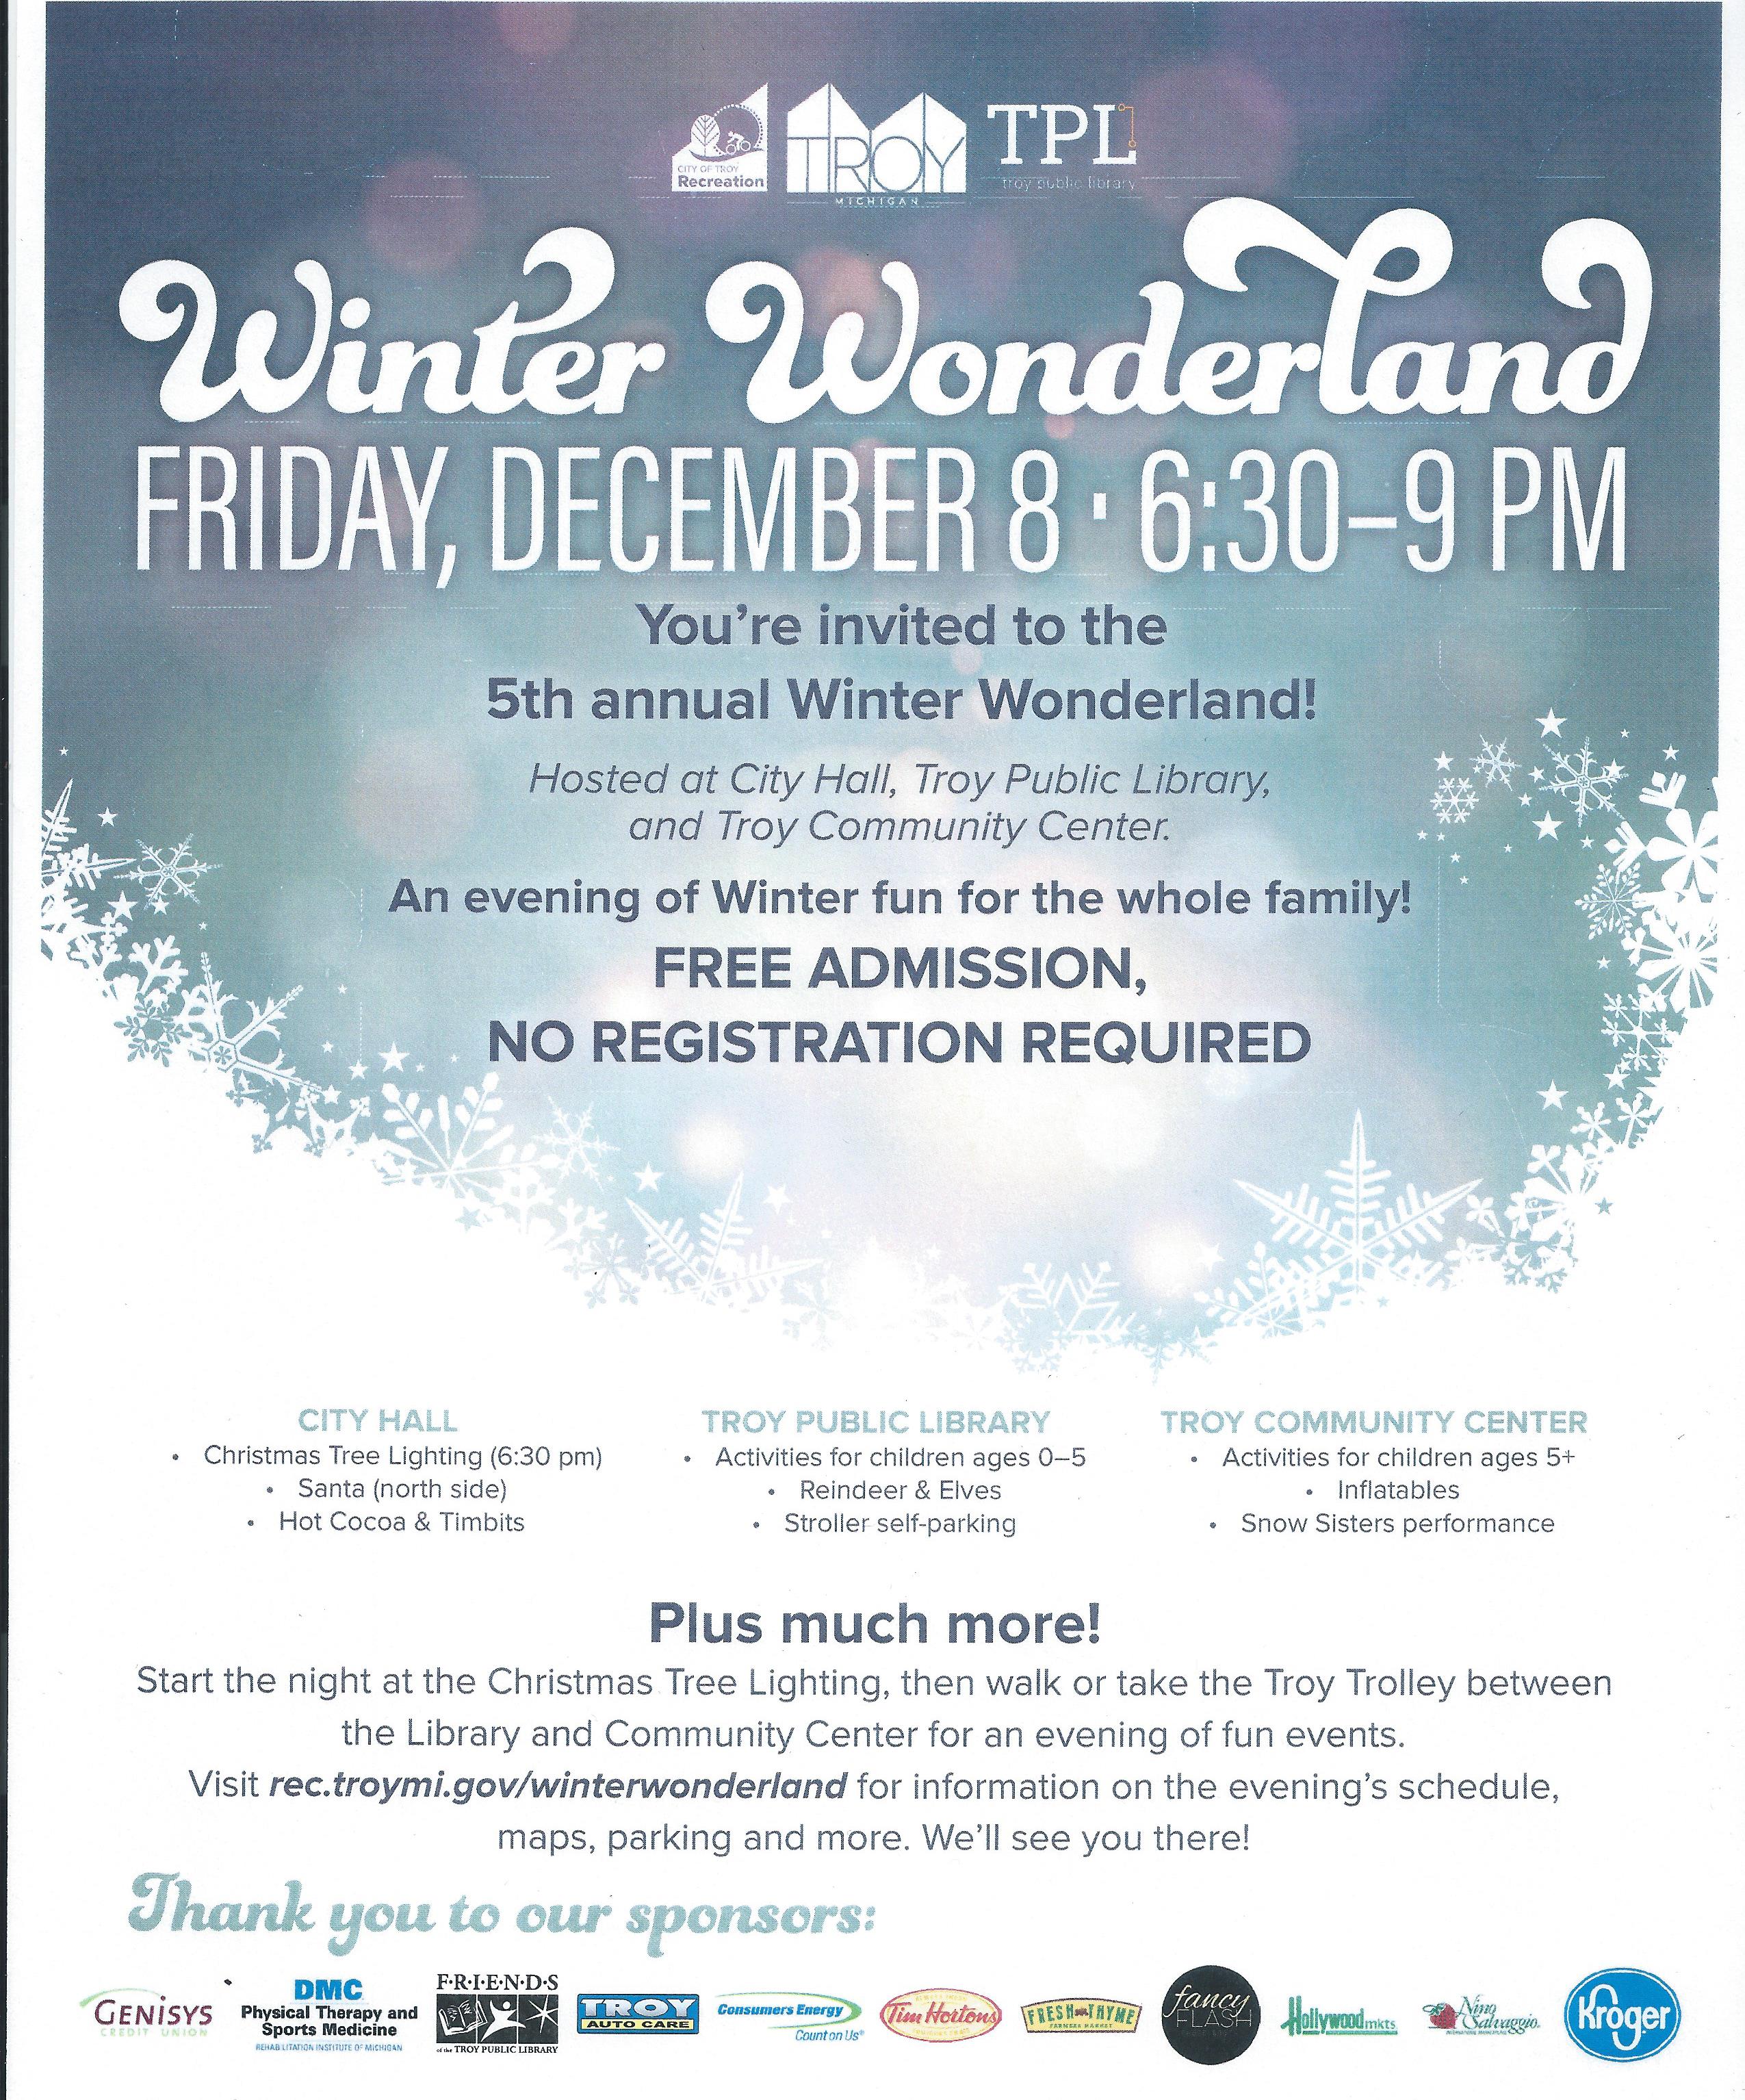 You’re Invited to the 5th Annual Winter Wonderland Festival on Friday December 8, 2017!    Sponsored in part by the Friends of the Troy Public Library